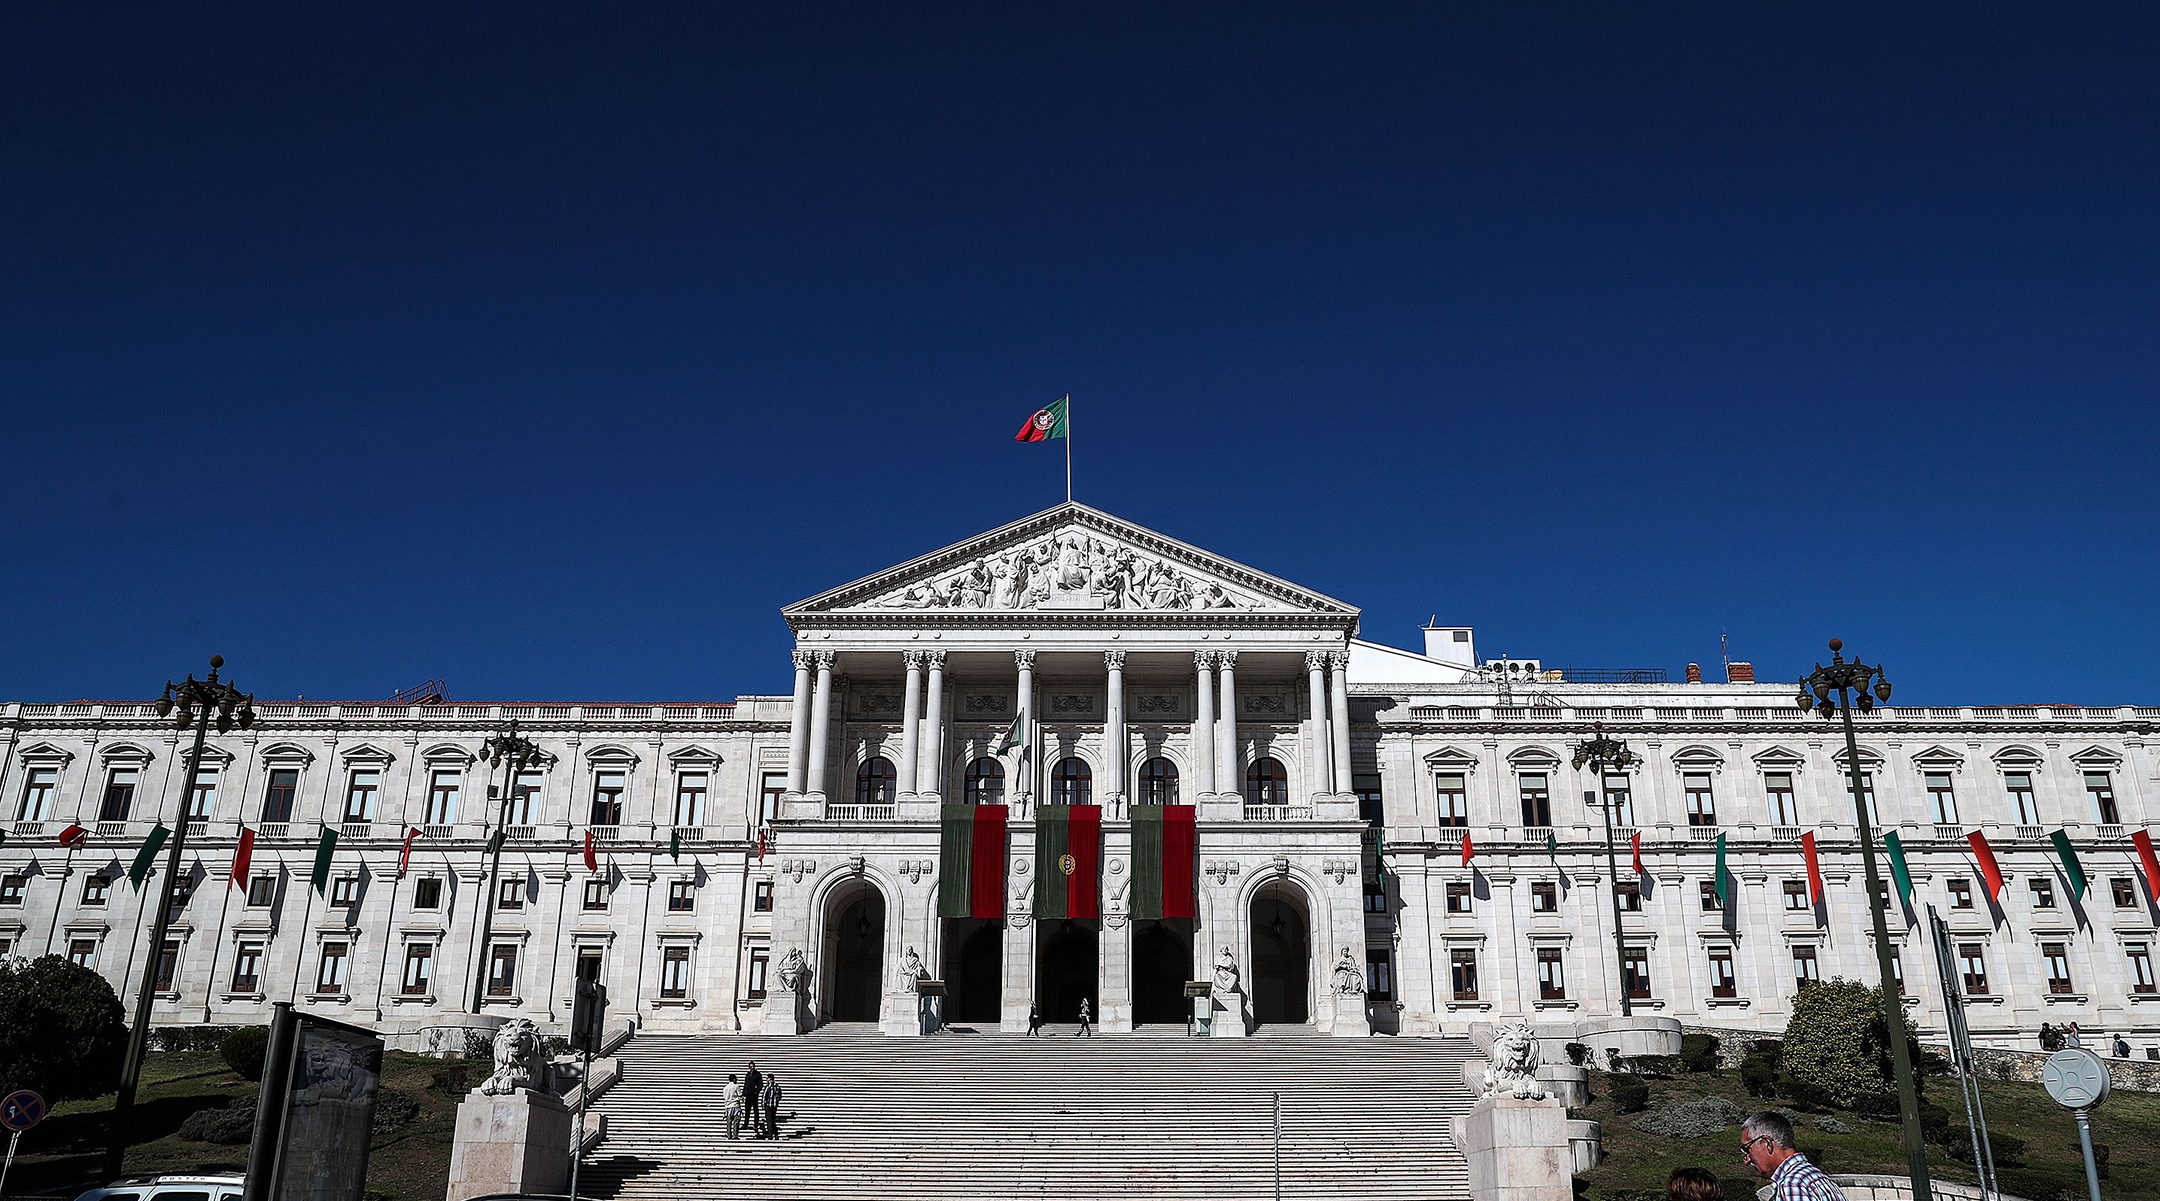 The Portuguese parliament building is seen in Lisbon, Oct. 25, 2019. (Carlos Costa/AFP via Getty Images)